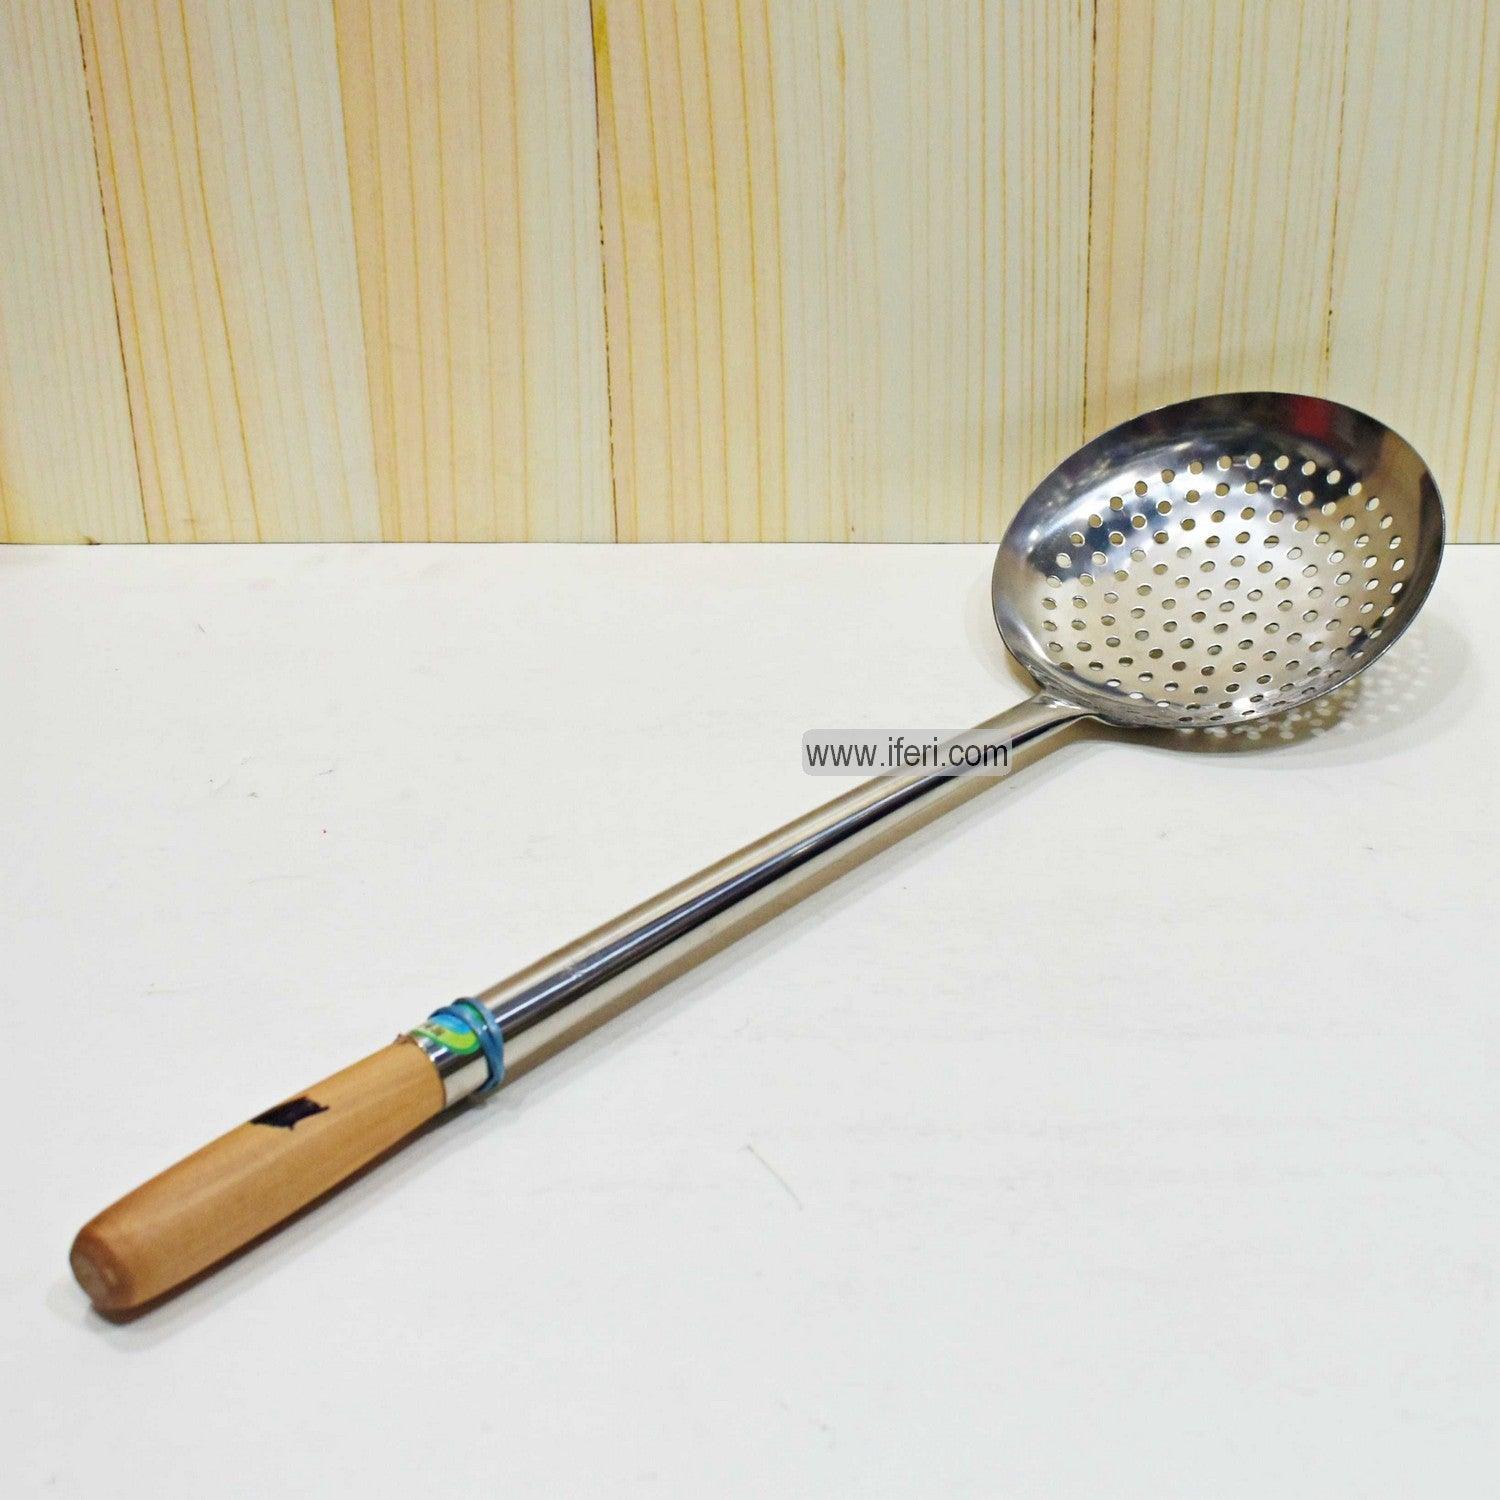 22.5 inch Stainless Steel Skimmer Spoon Colander Strainer for Cooking and Frying SN0692-1 Price in Bangladesh - iferi.com